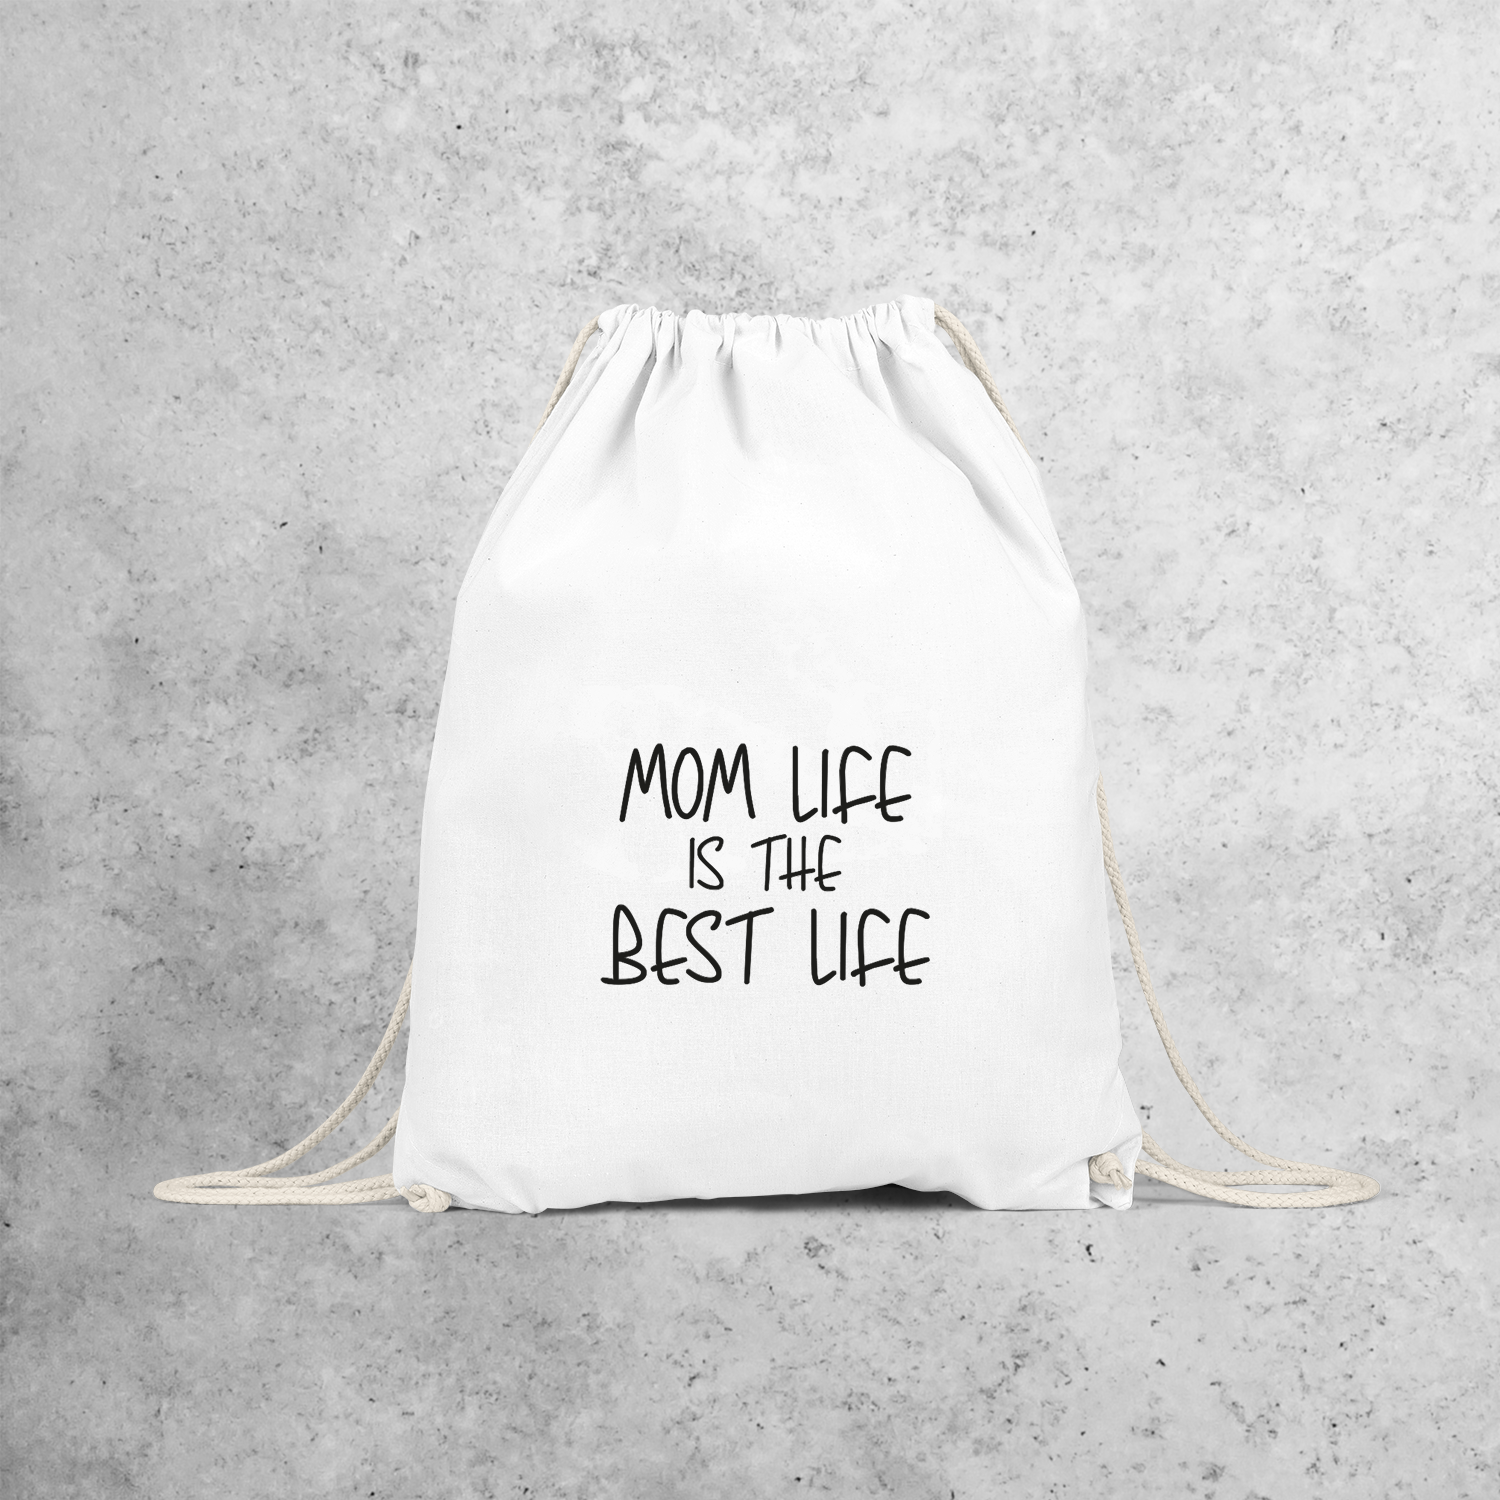 'Mom life is the best life' backpack